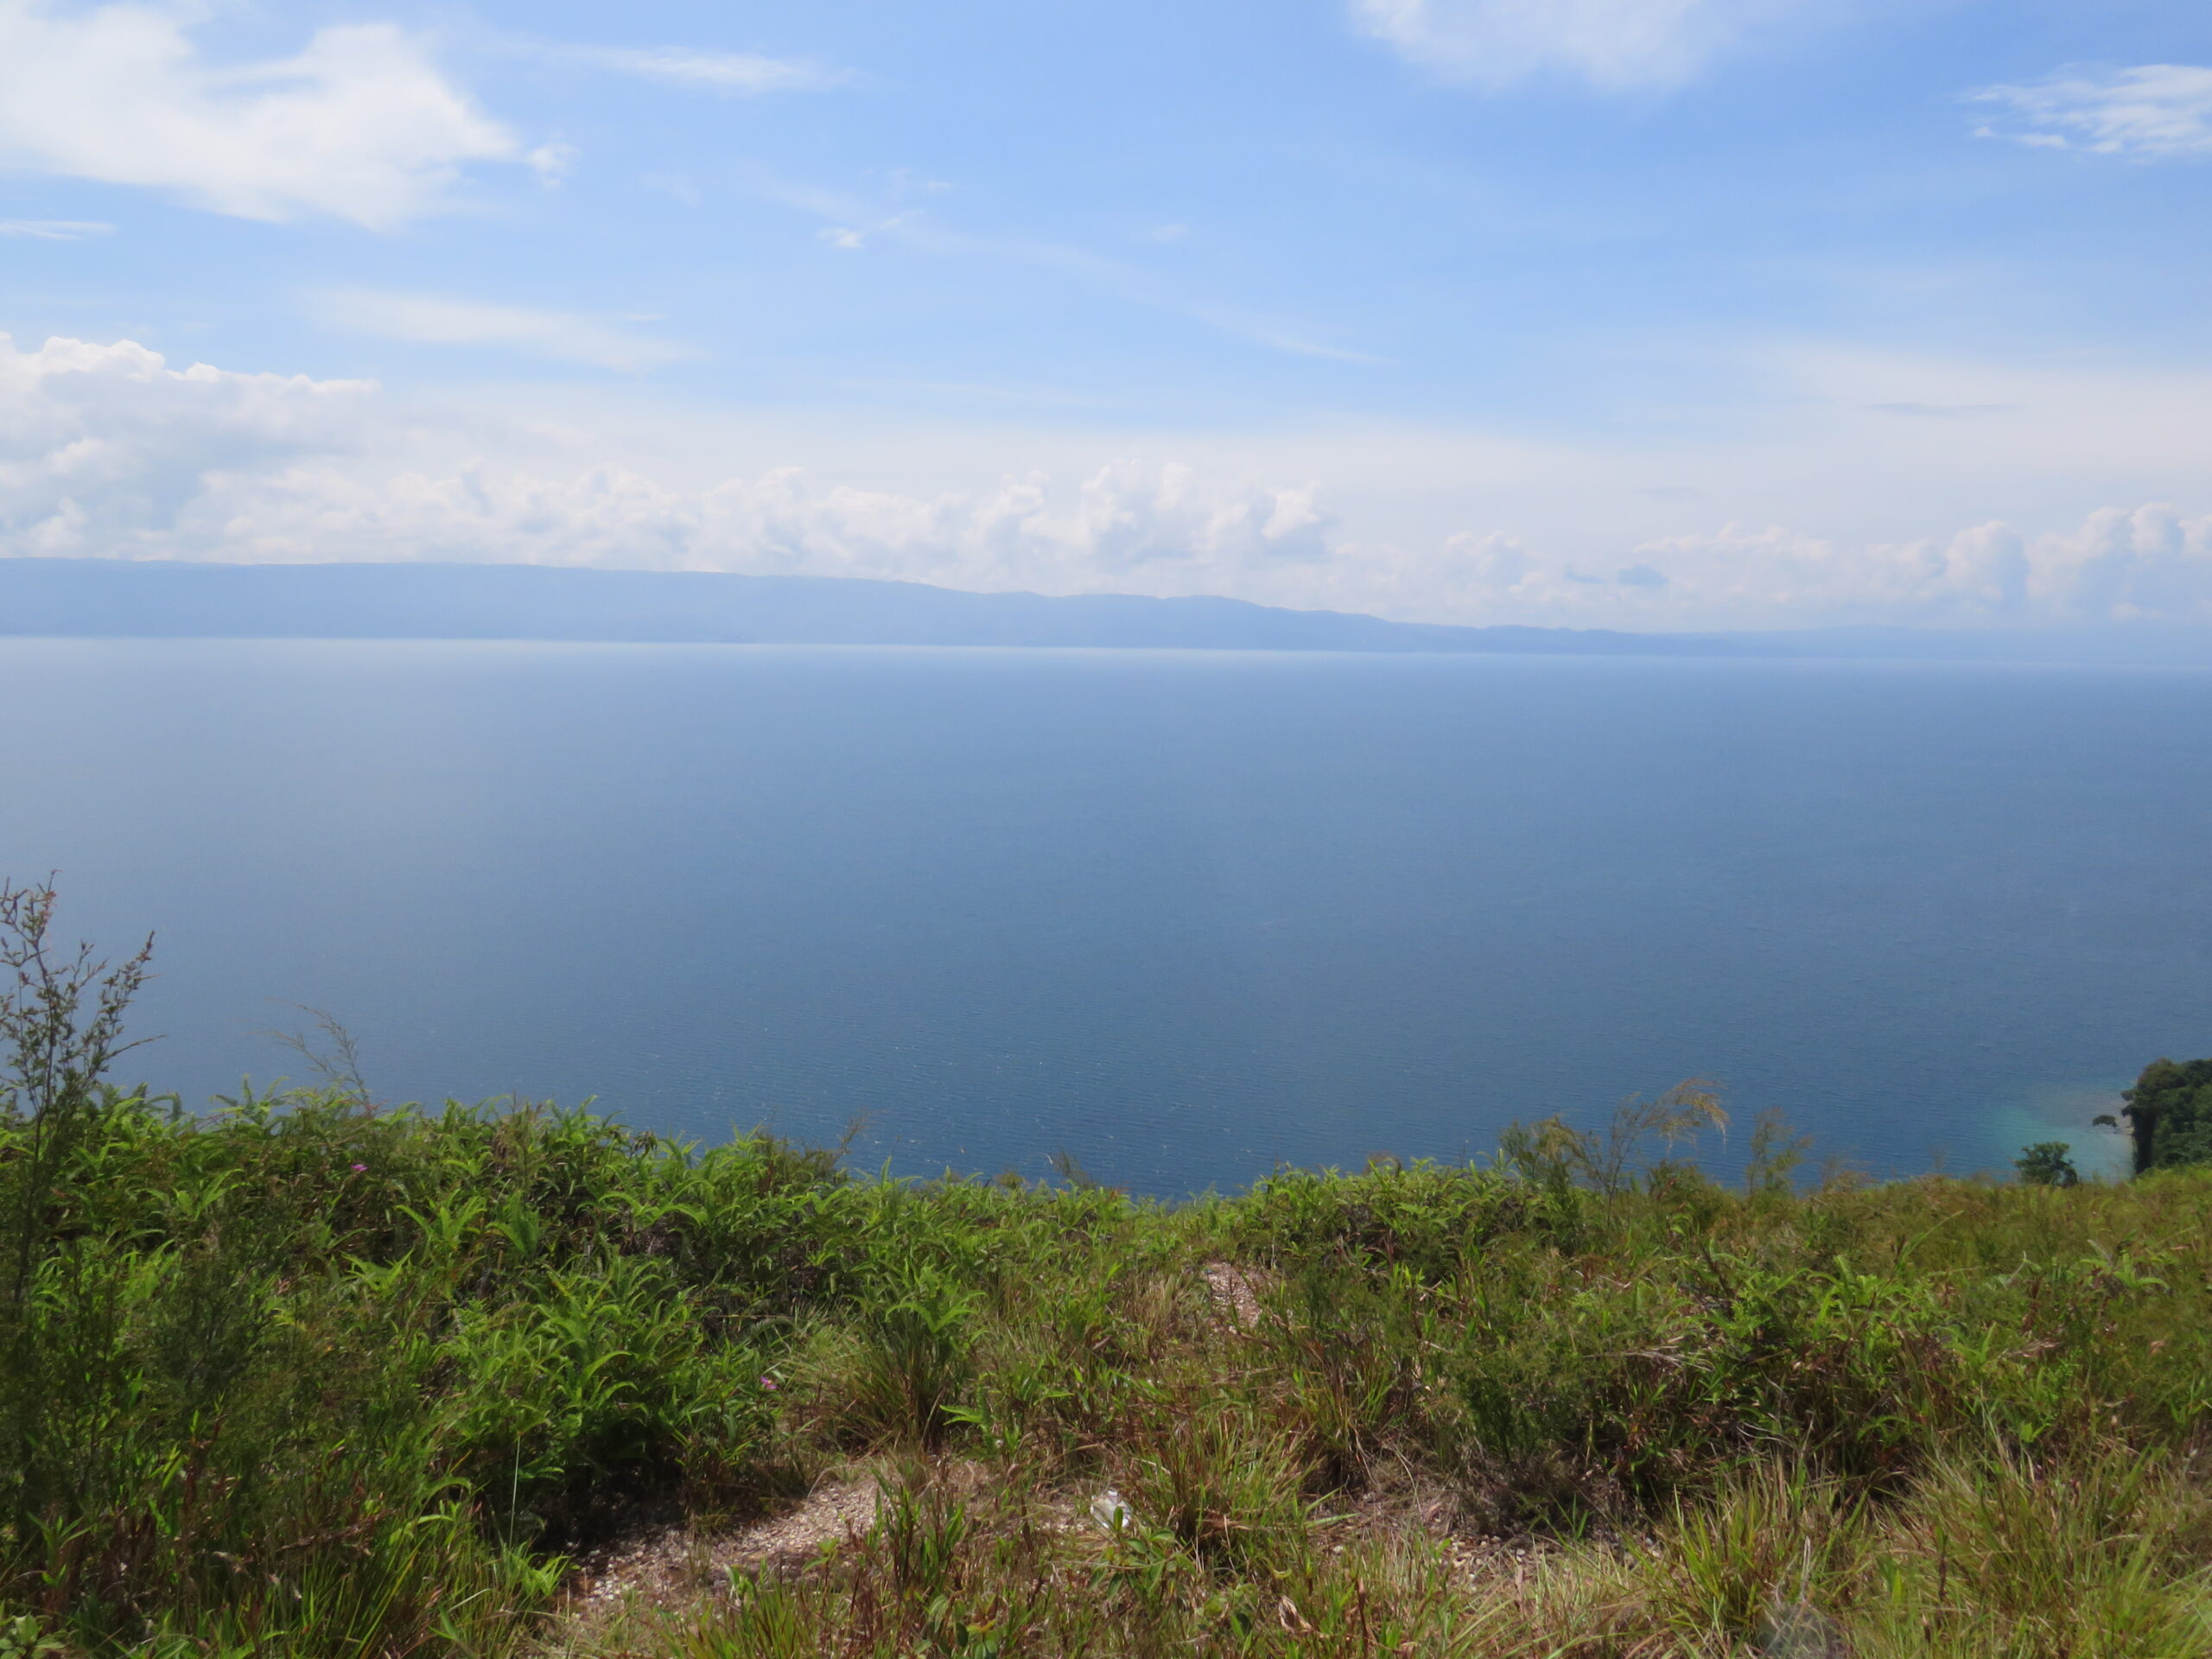 A photograph of Lake Poso, taken by PROGRES in Sulawesi.